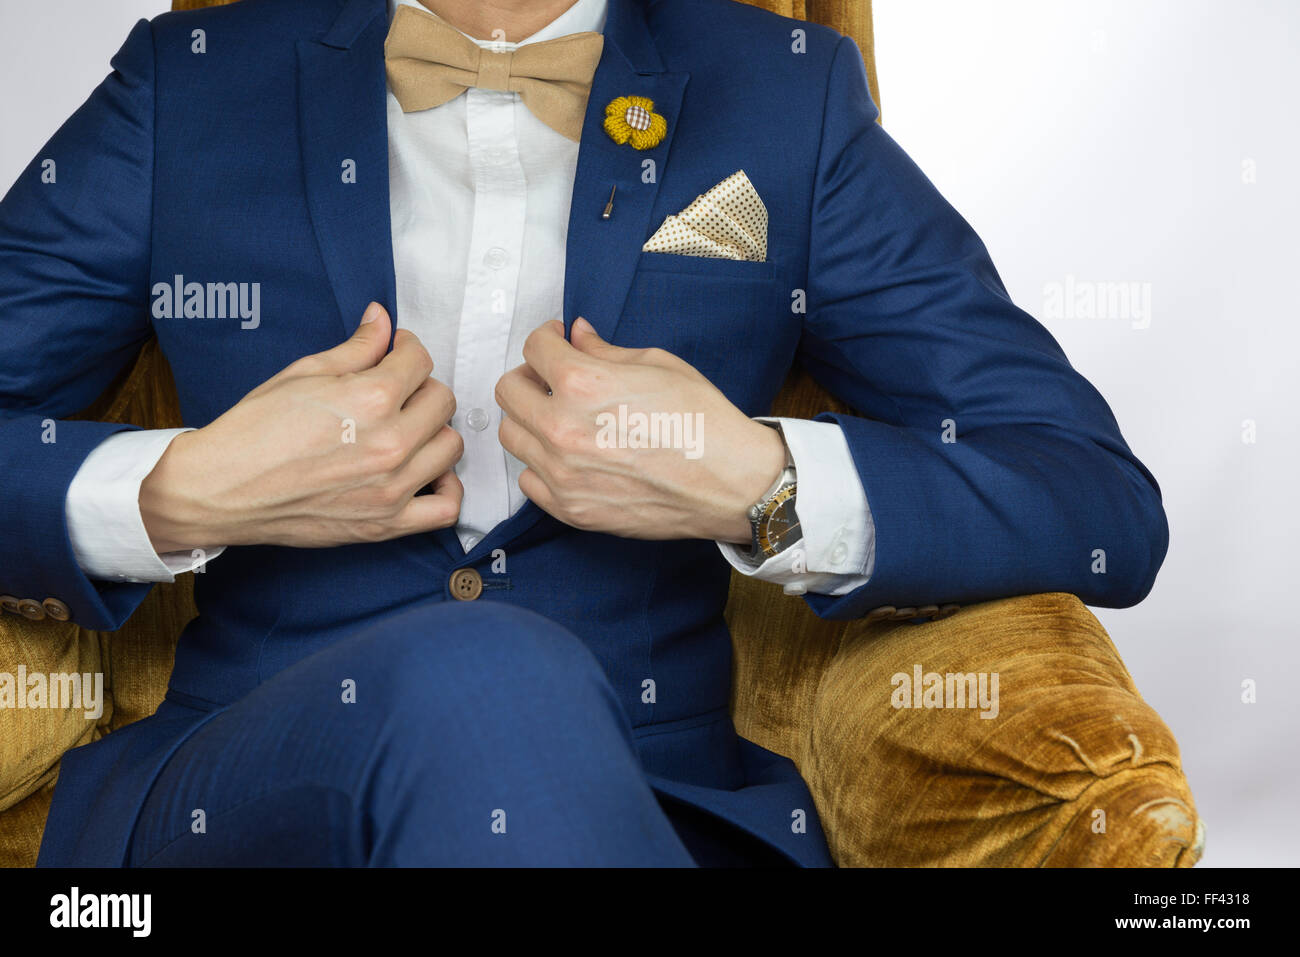 Man in blue suit with coffee cream bowtie color, flower brooch, and dot pattern pocket square sitting on cozy sofa Stock Photo